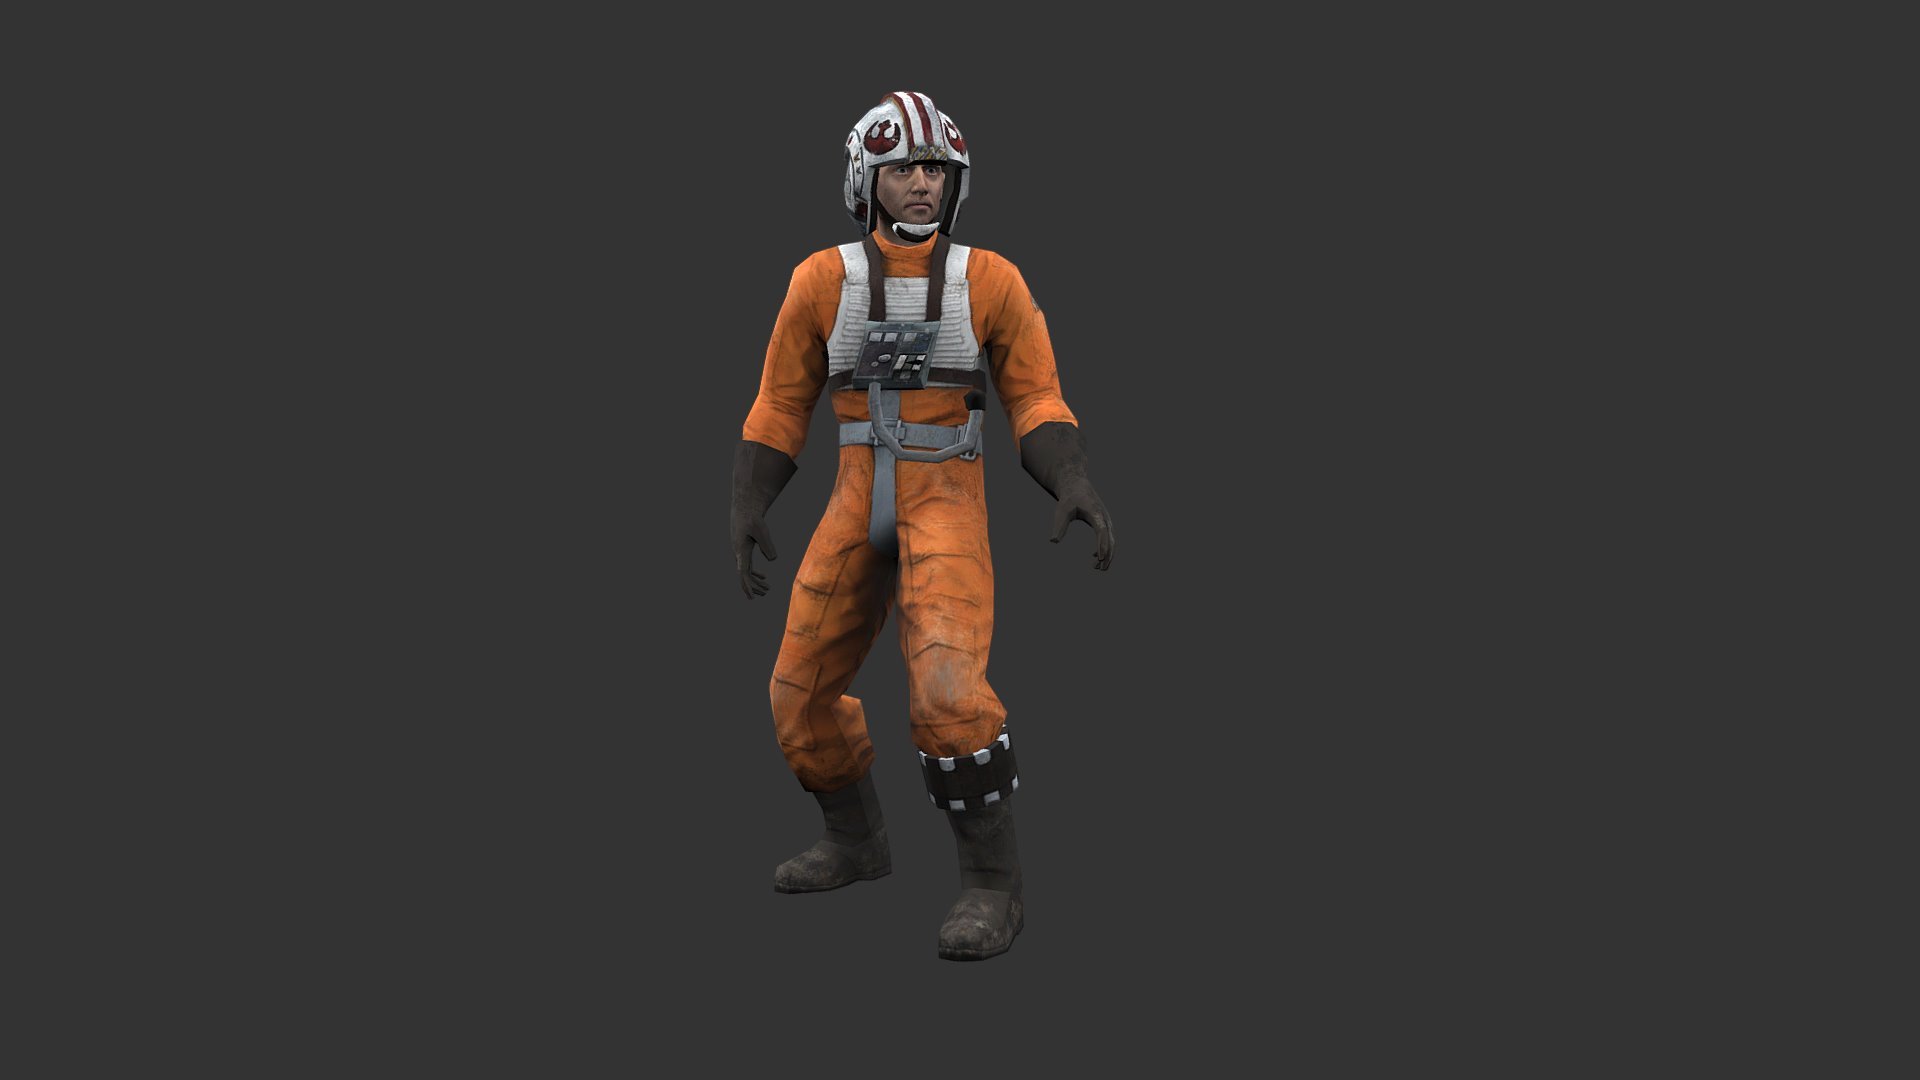 Rebel pilots were pilots who served the Rebel Alliance under the Alliance’s starfighter corps. 

This Rebel Pilot is just one of the many Star Wars exhibits that can seen in the  Star Wars Virtual Museum.

Download the Star Wars Virtual Museum here:

http://www.starwarsvirtualmuseum.com - Rebel Pilot - 3D model by Mind Mulch for The Masses (@mindmulchforthemasses) 3d model